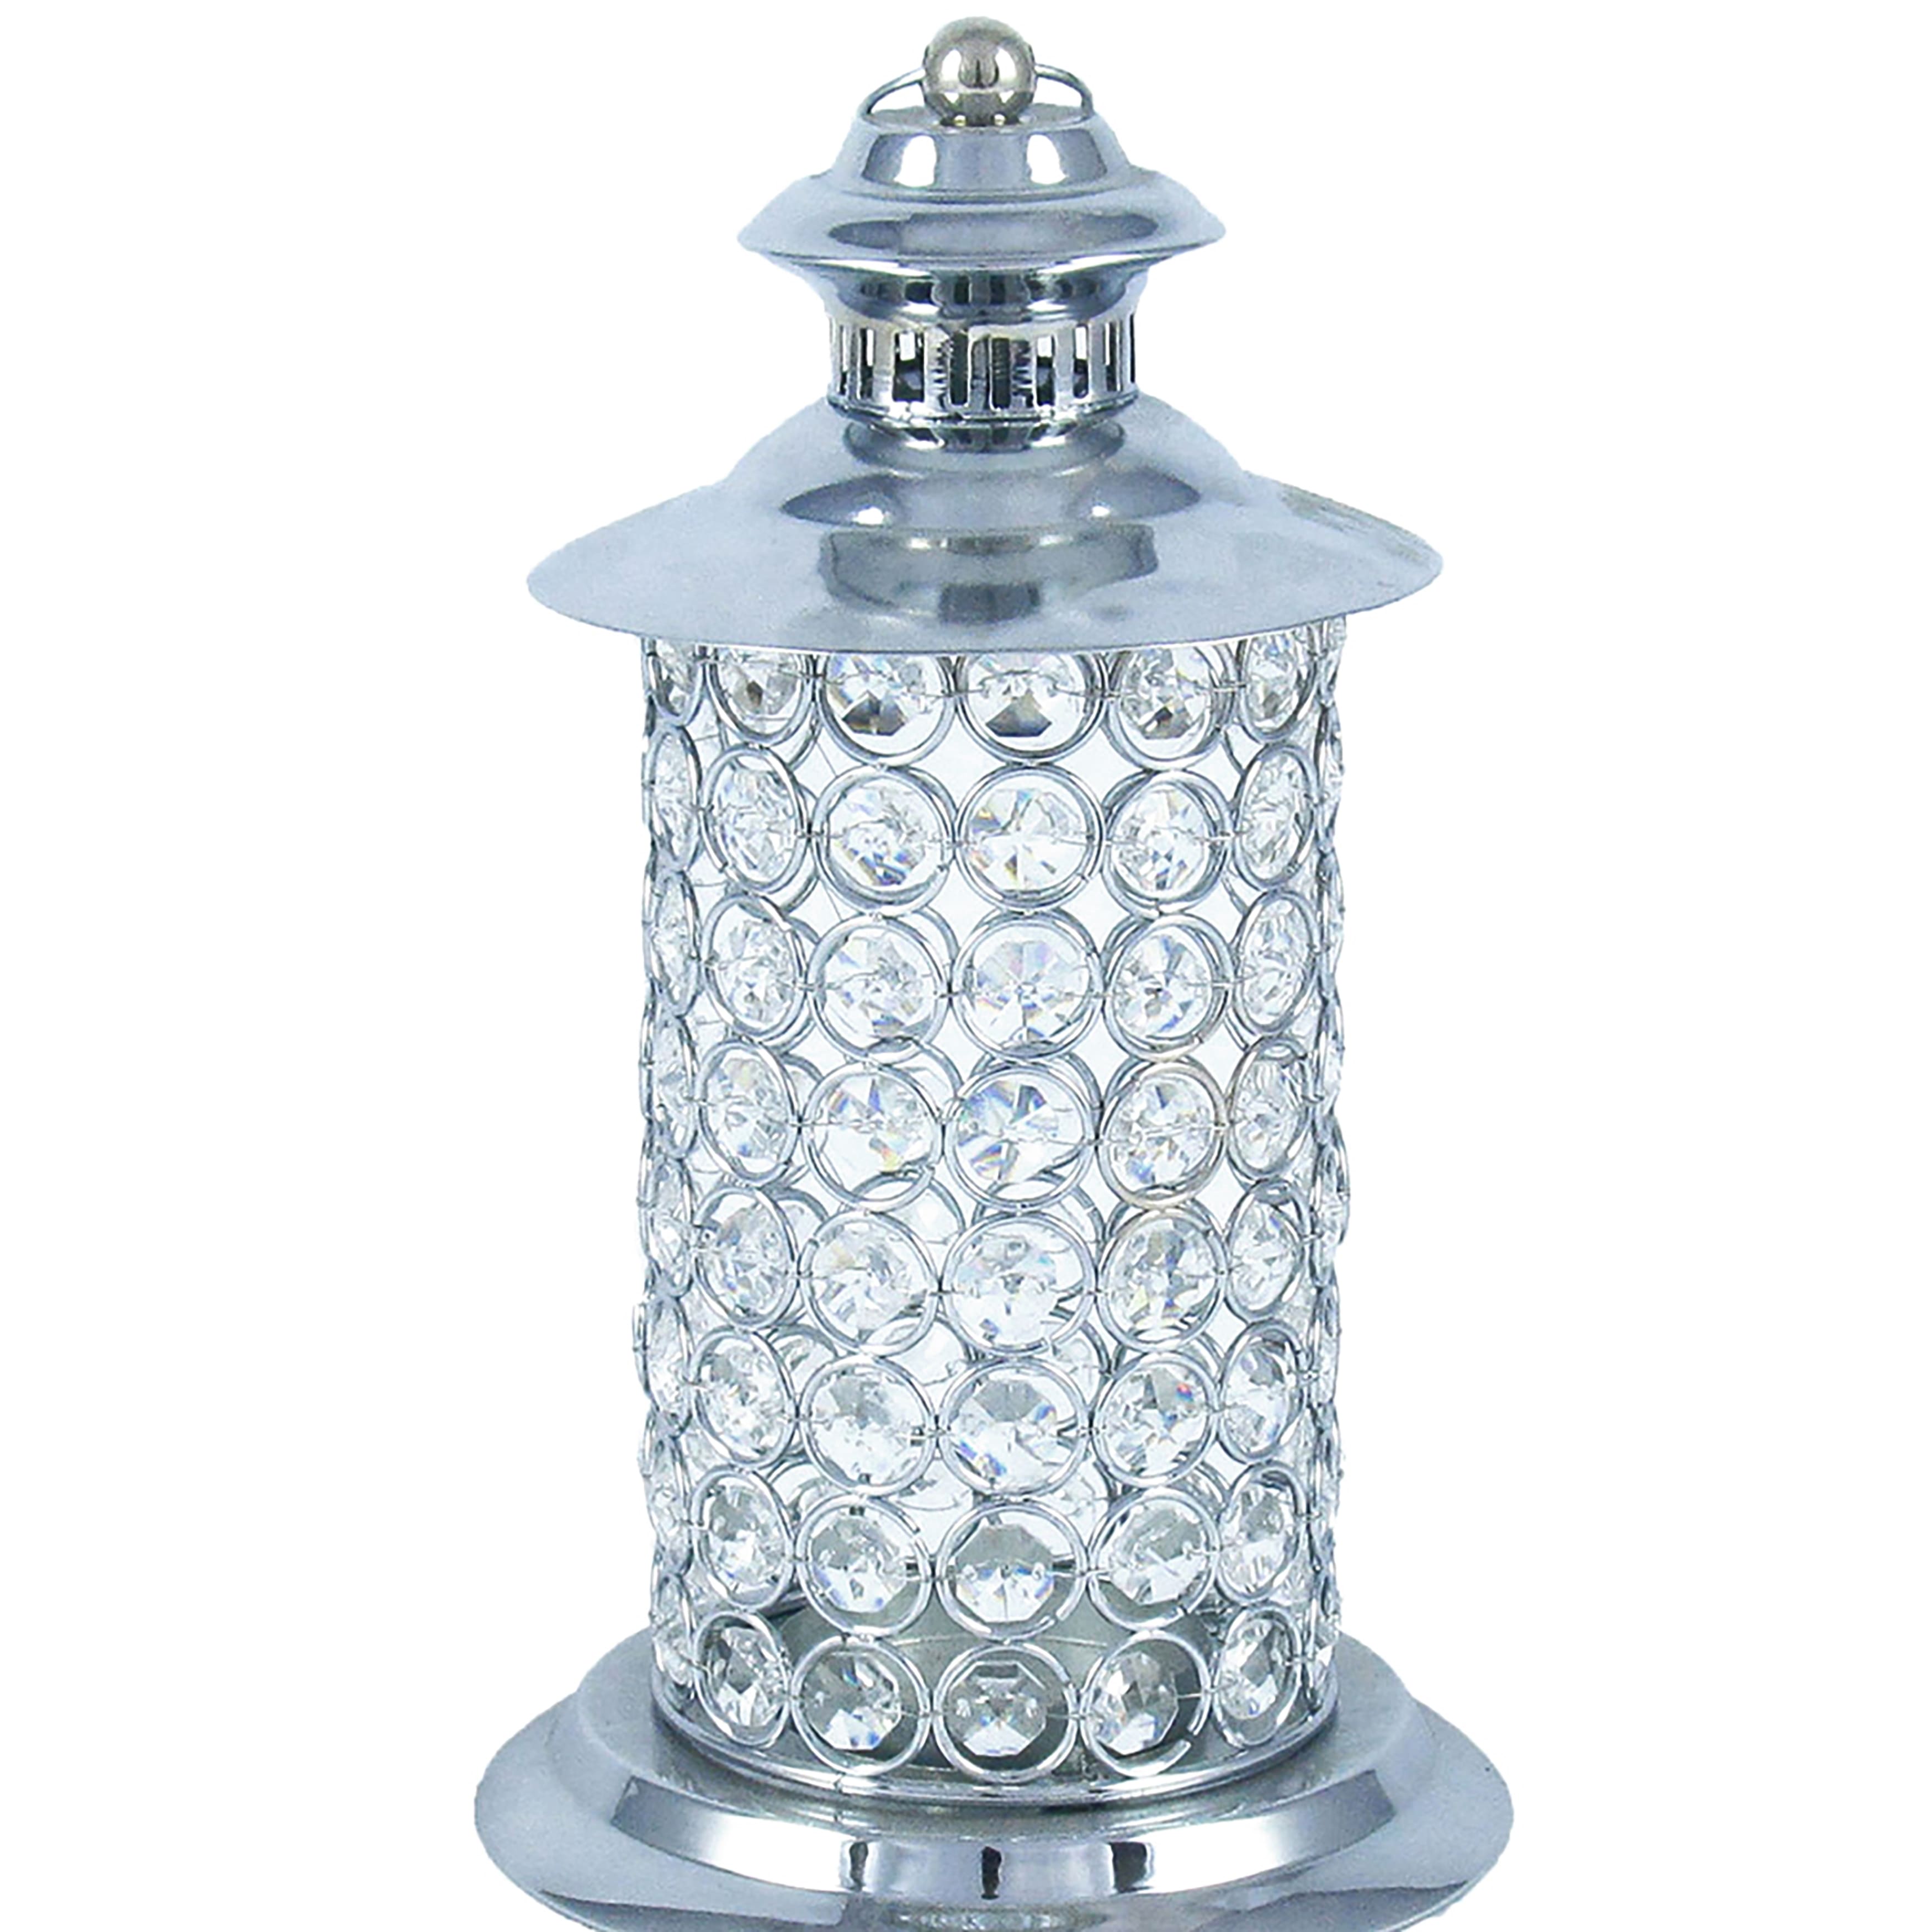 Silver Crystal Bead Hurricane Lantern Candle Holder Centerpiece 11in ...